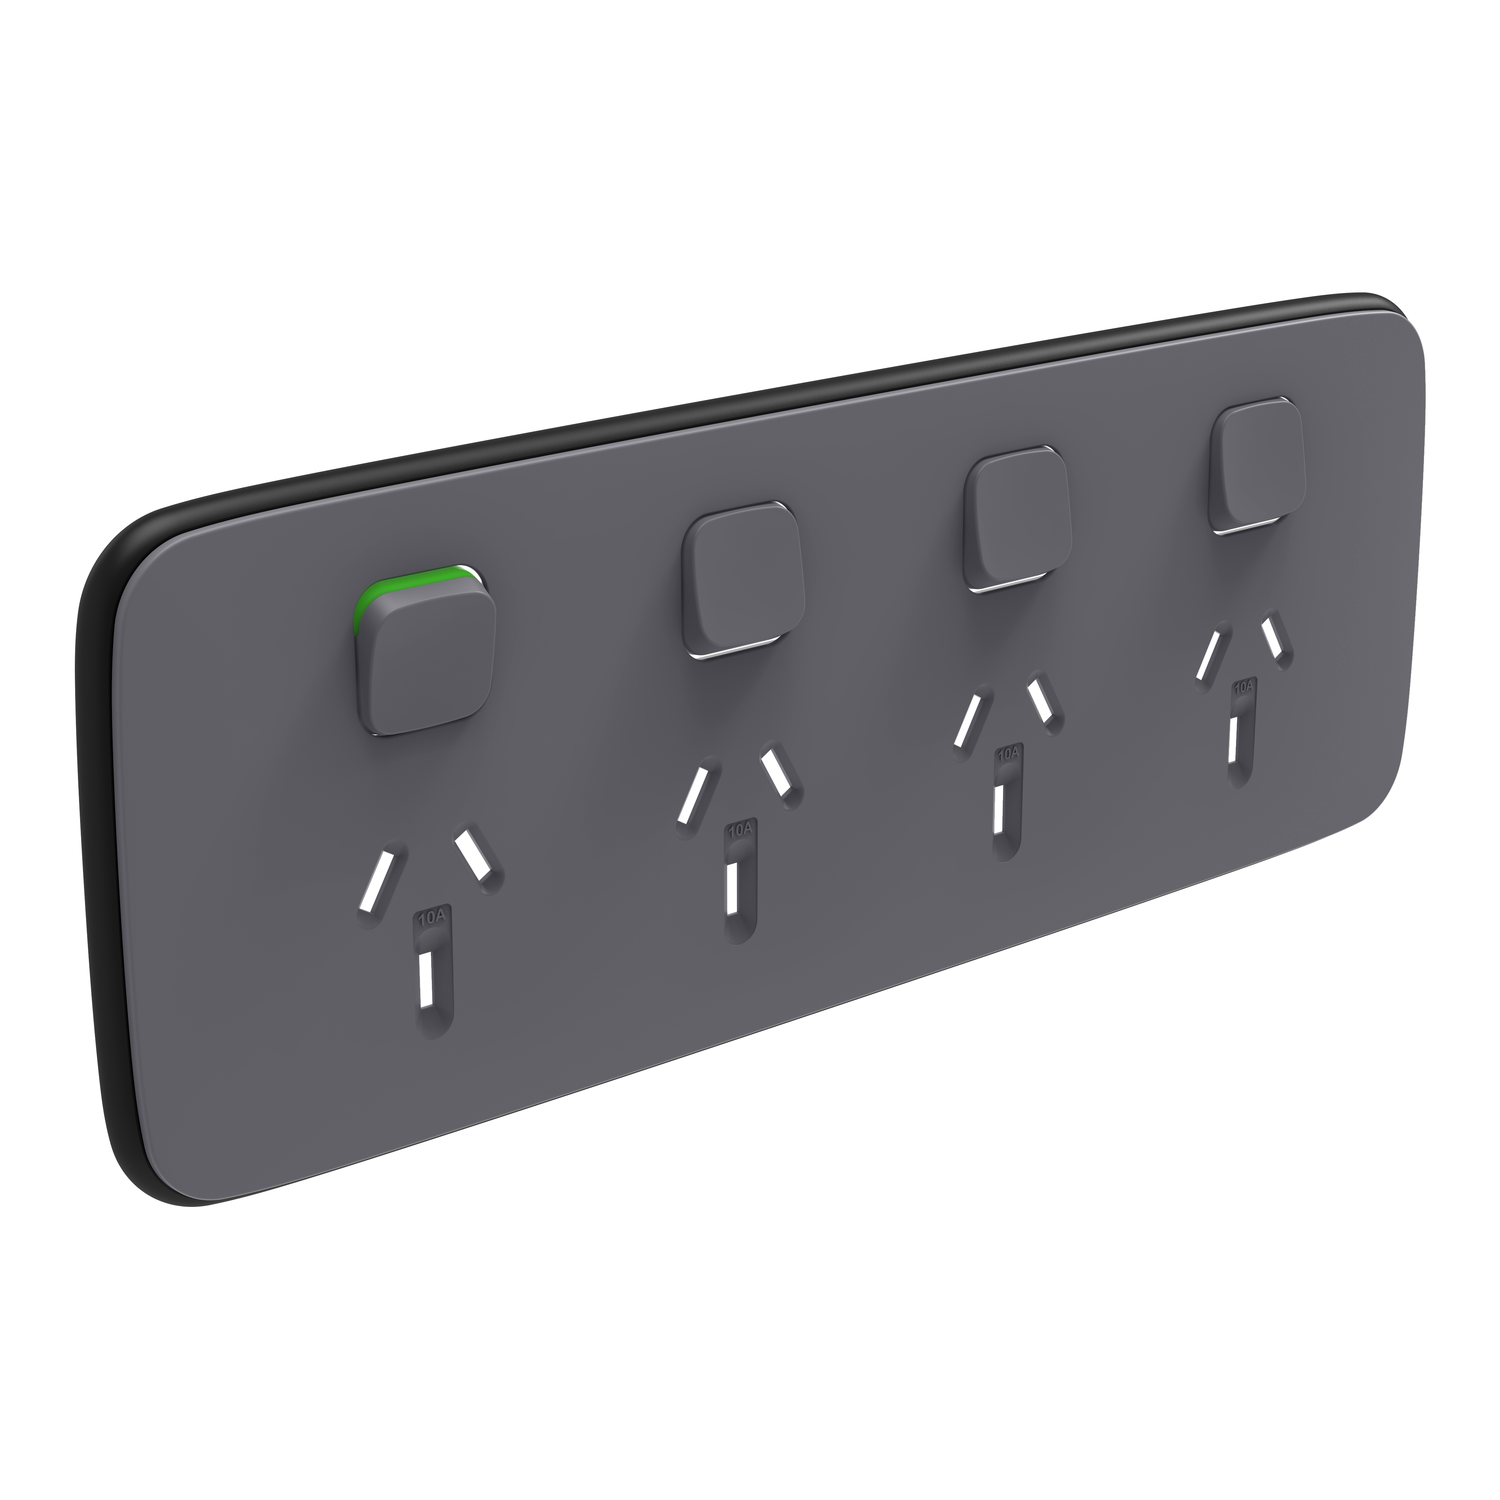 PDL Iconic Essence - Cover Plate Quad Switched Socket - Ash Grey